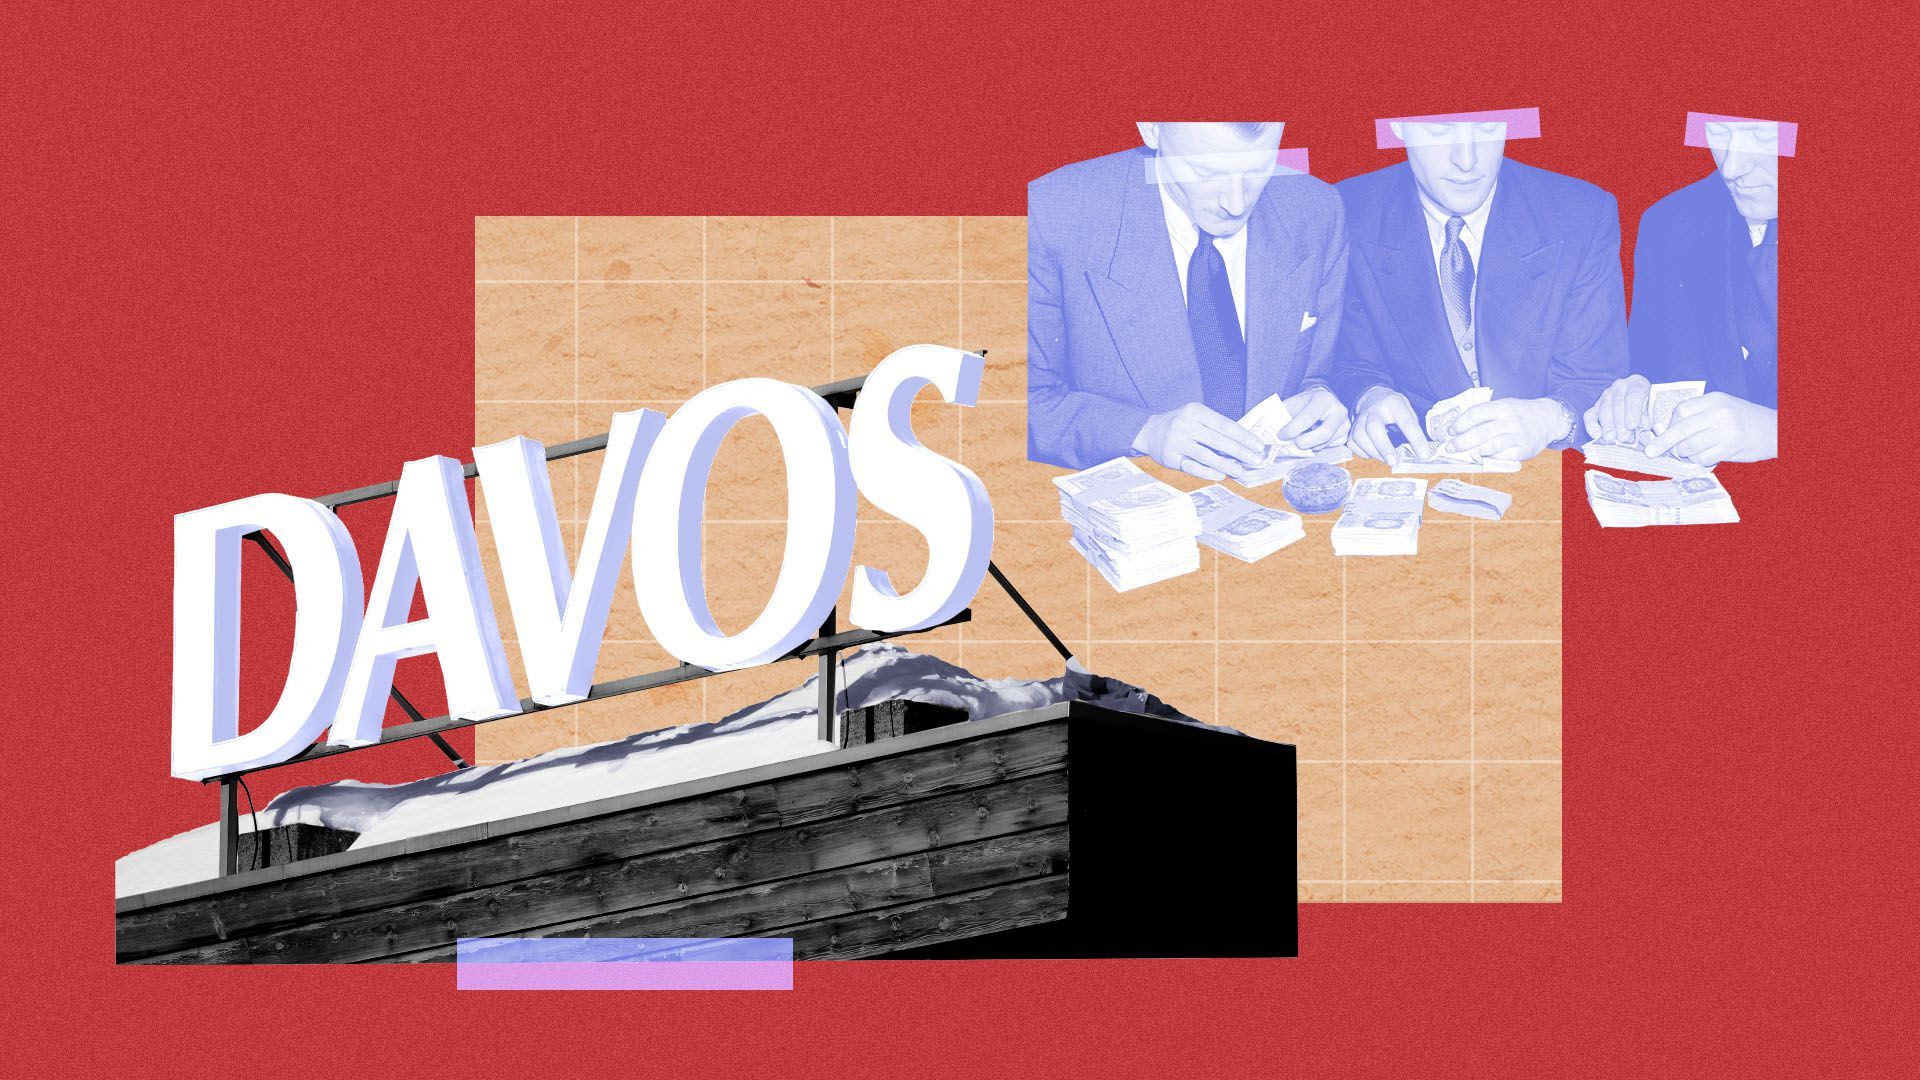 illustration of davos Photo Illustration: Sarah Grillo/Axios. Photos via Getty Images: Fabrice Coffrini/AFP and Harold Clements/Express